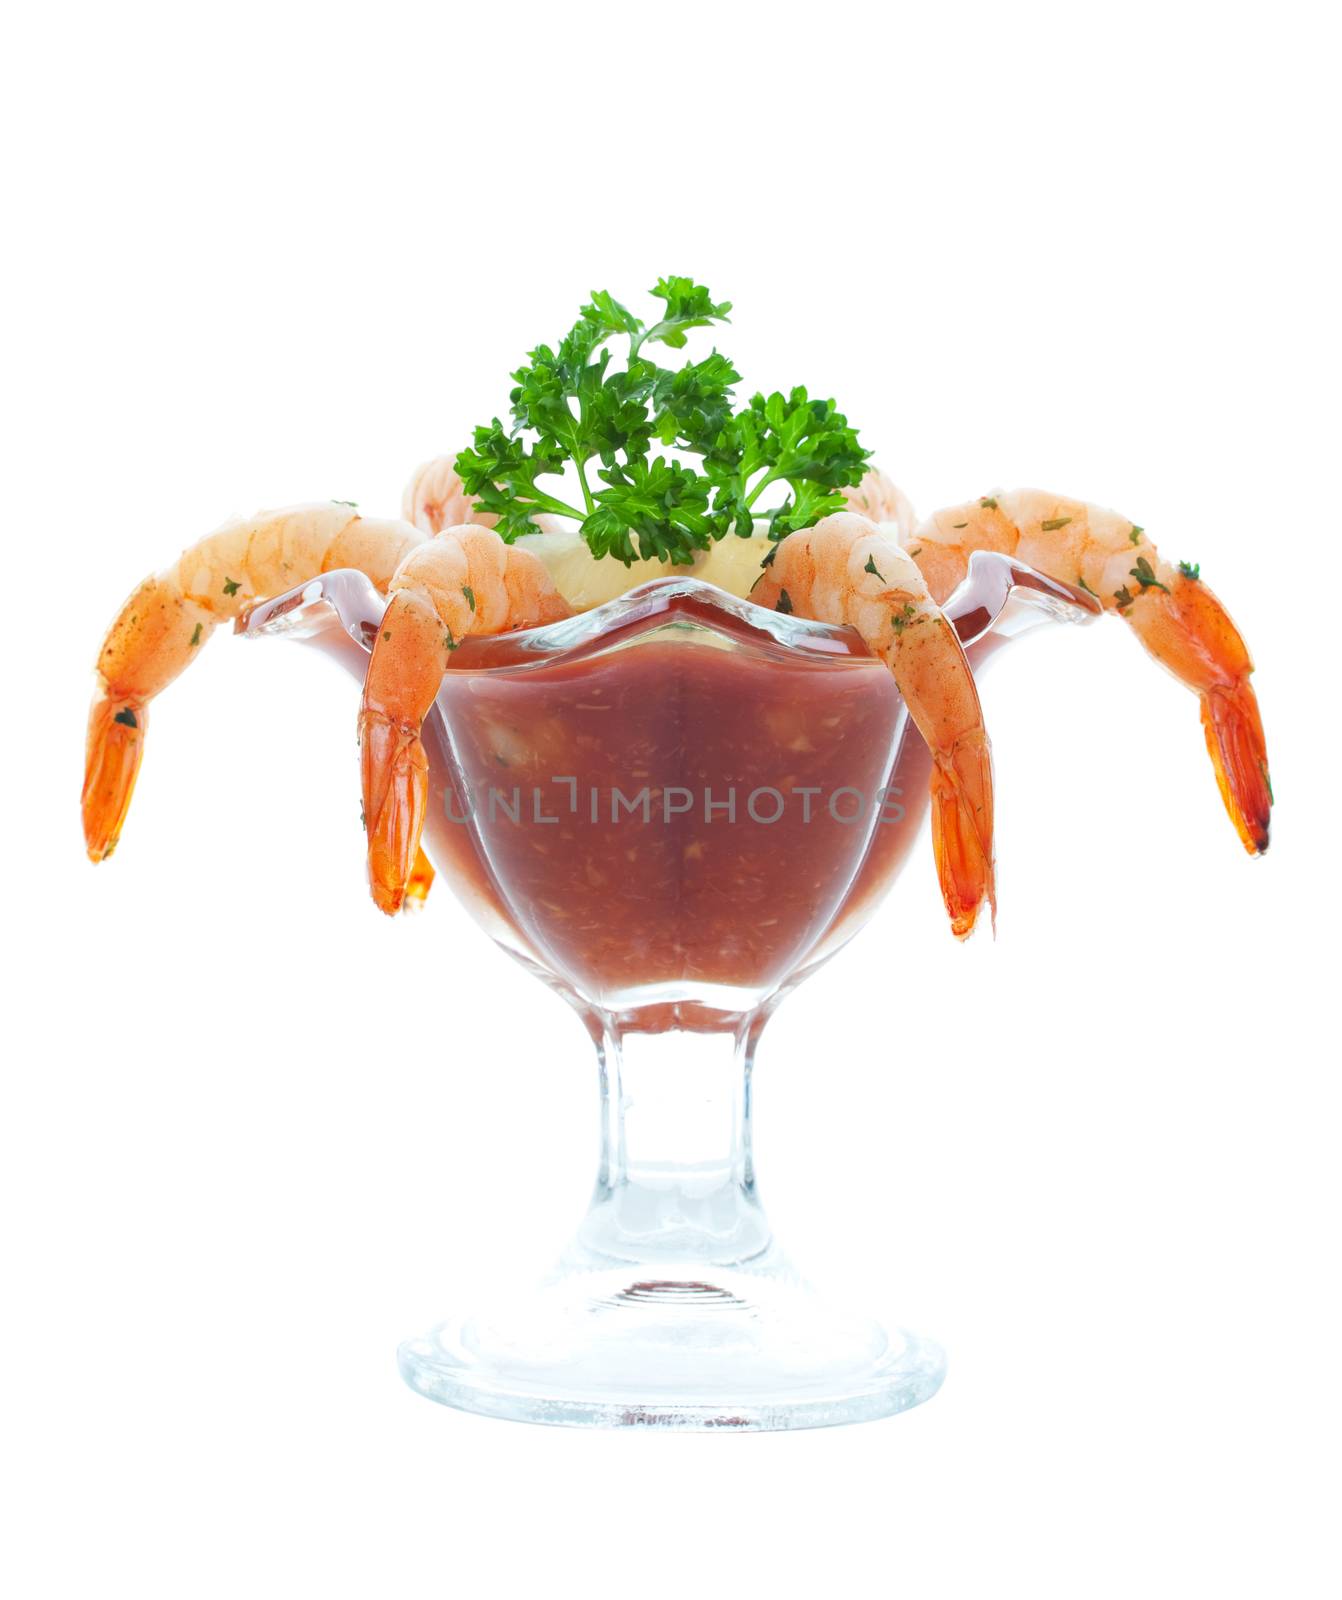 Shrimp cocktail served with seafood cocktail sauce and a wedge of lemon.  Shot on white background.
